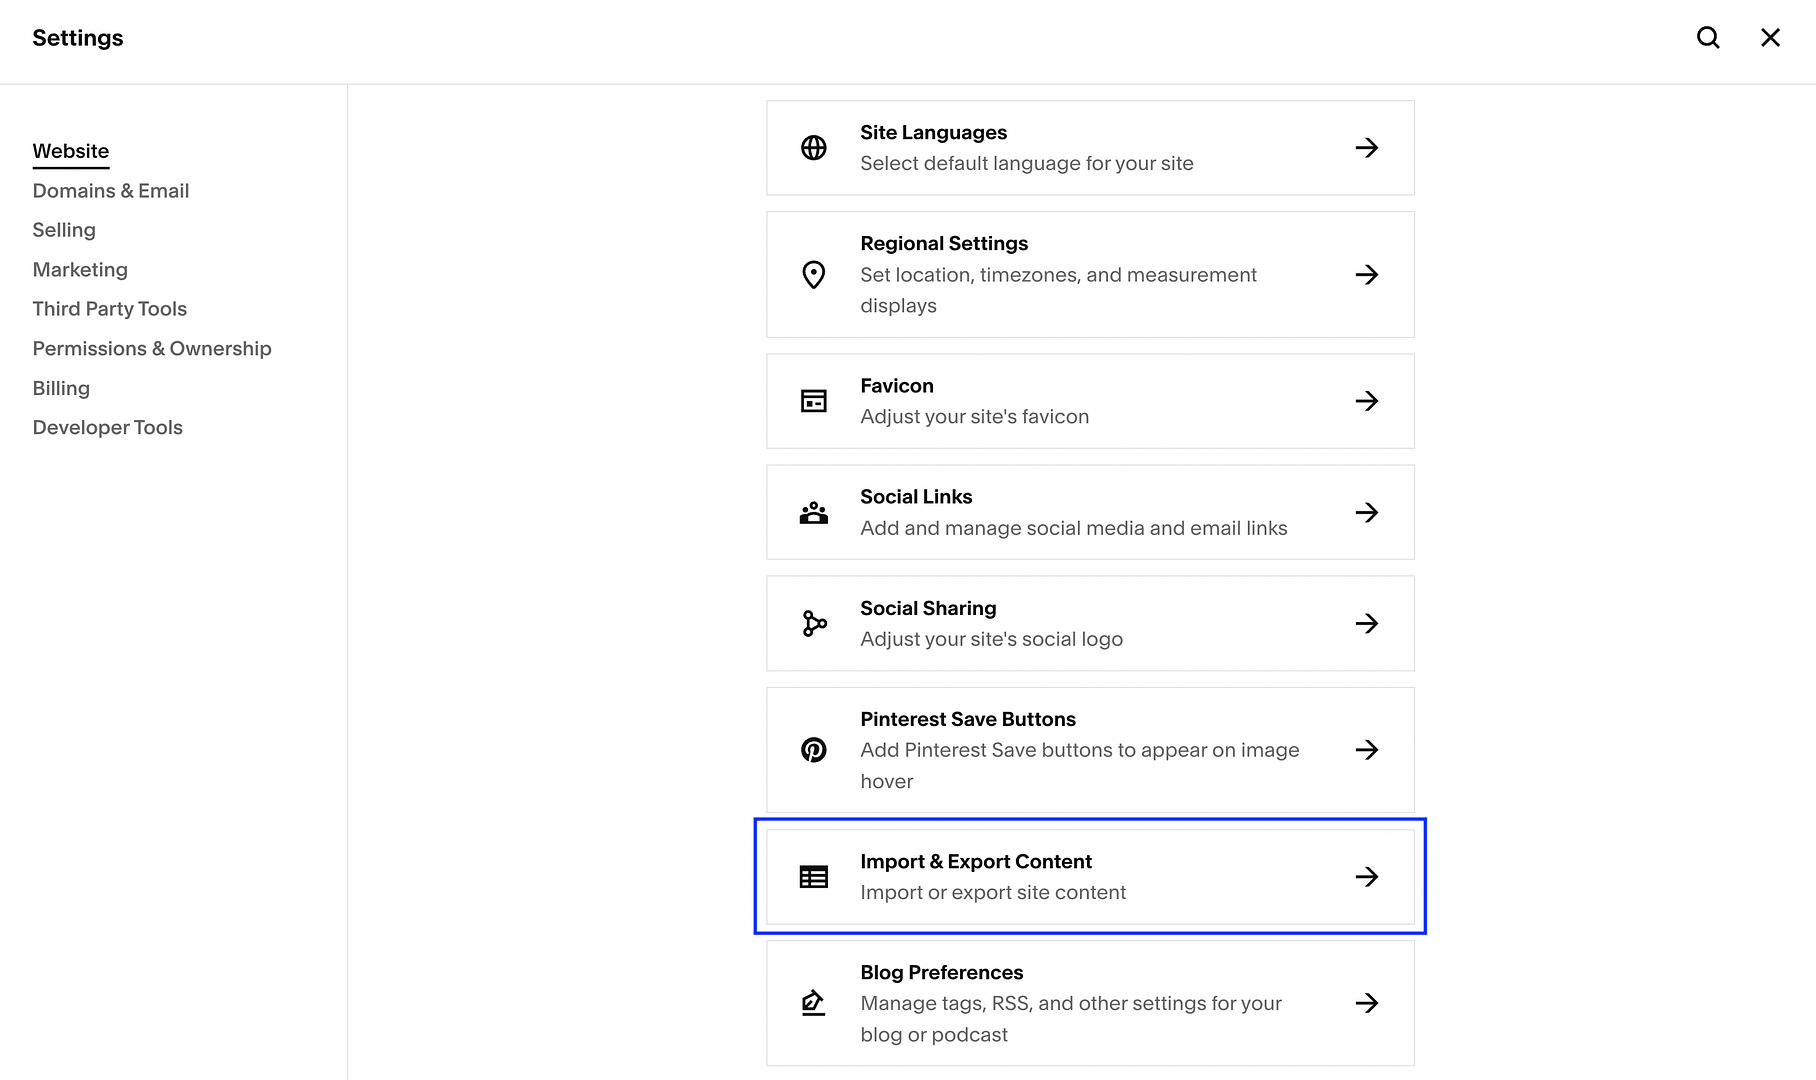 The Import & Export Content option in Squarespace Settings